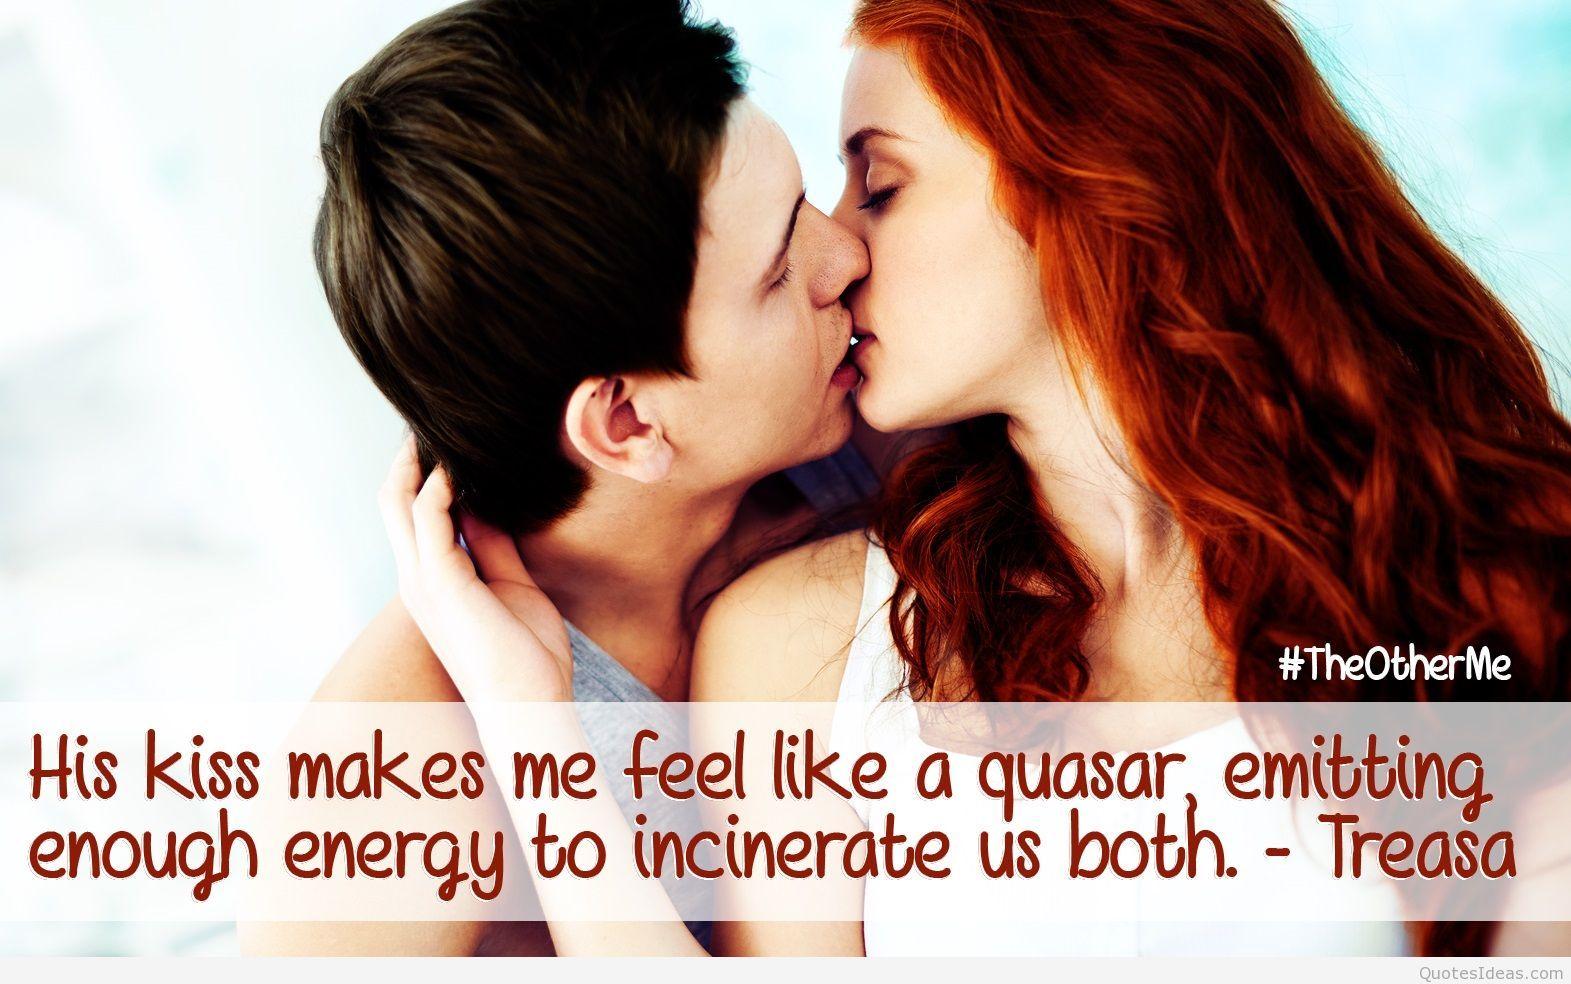 Awesome kissing quotes image and kissing couples quotes